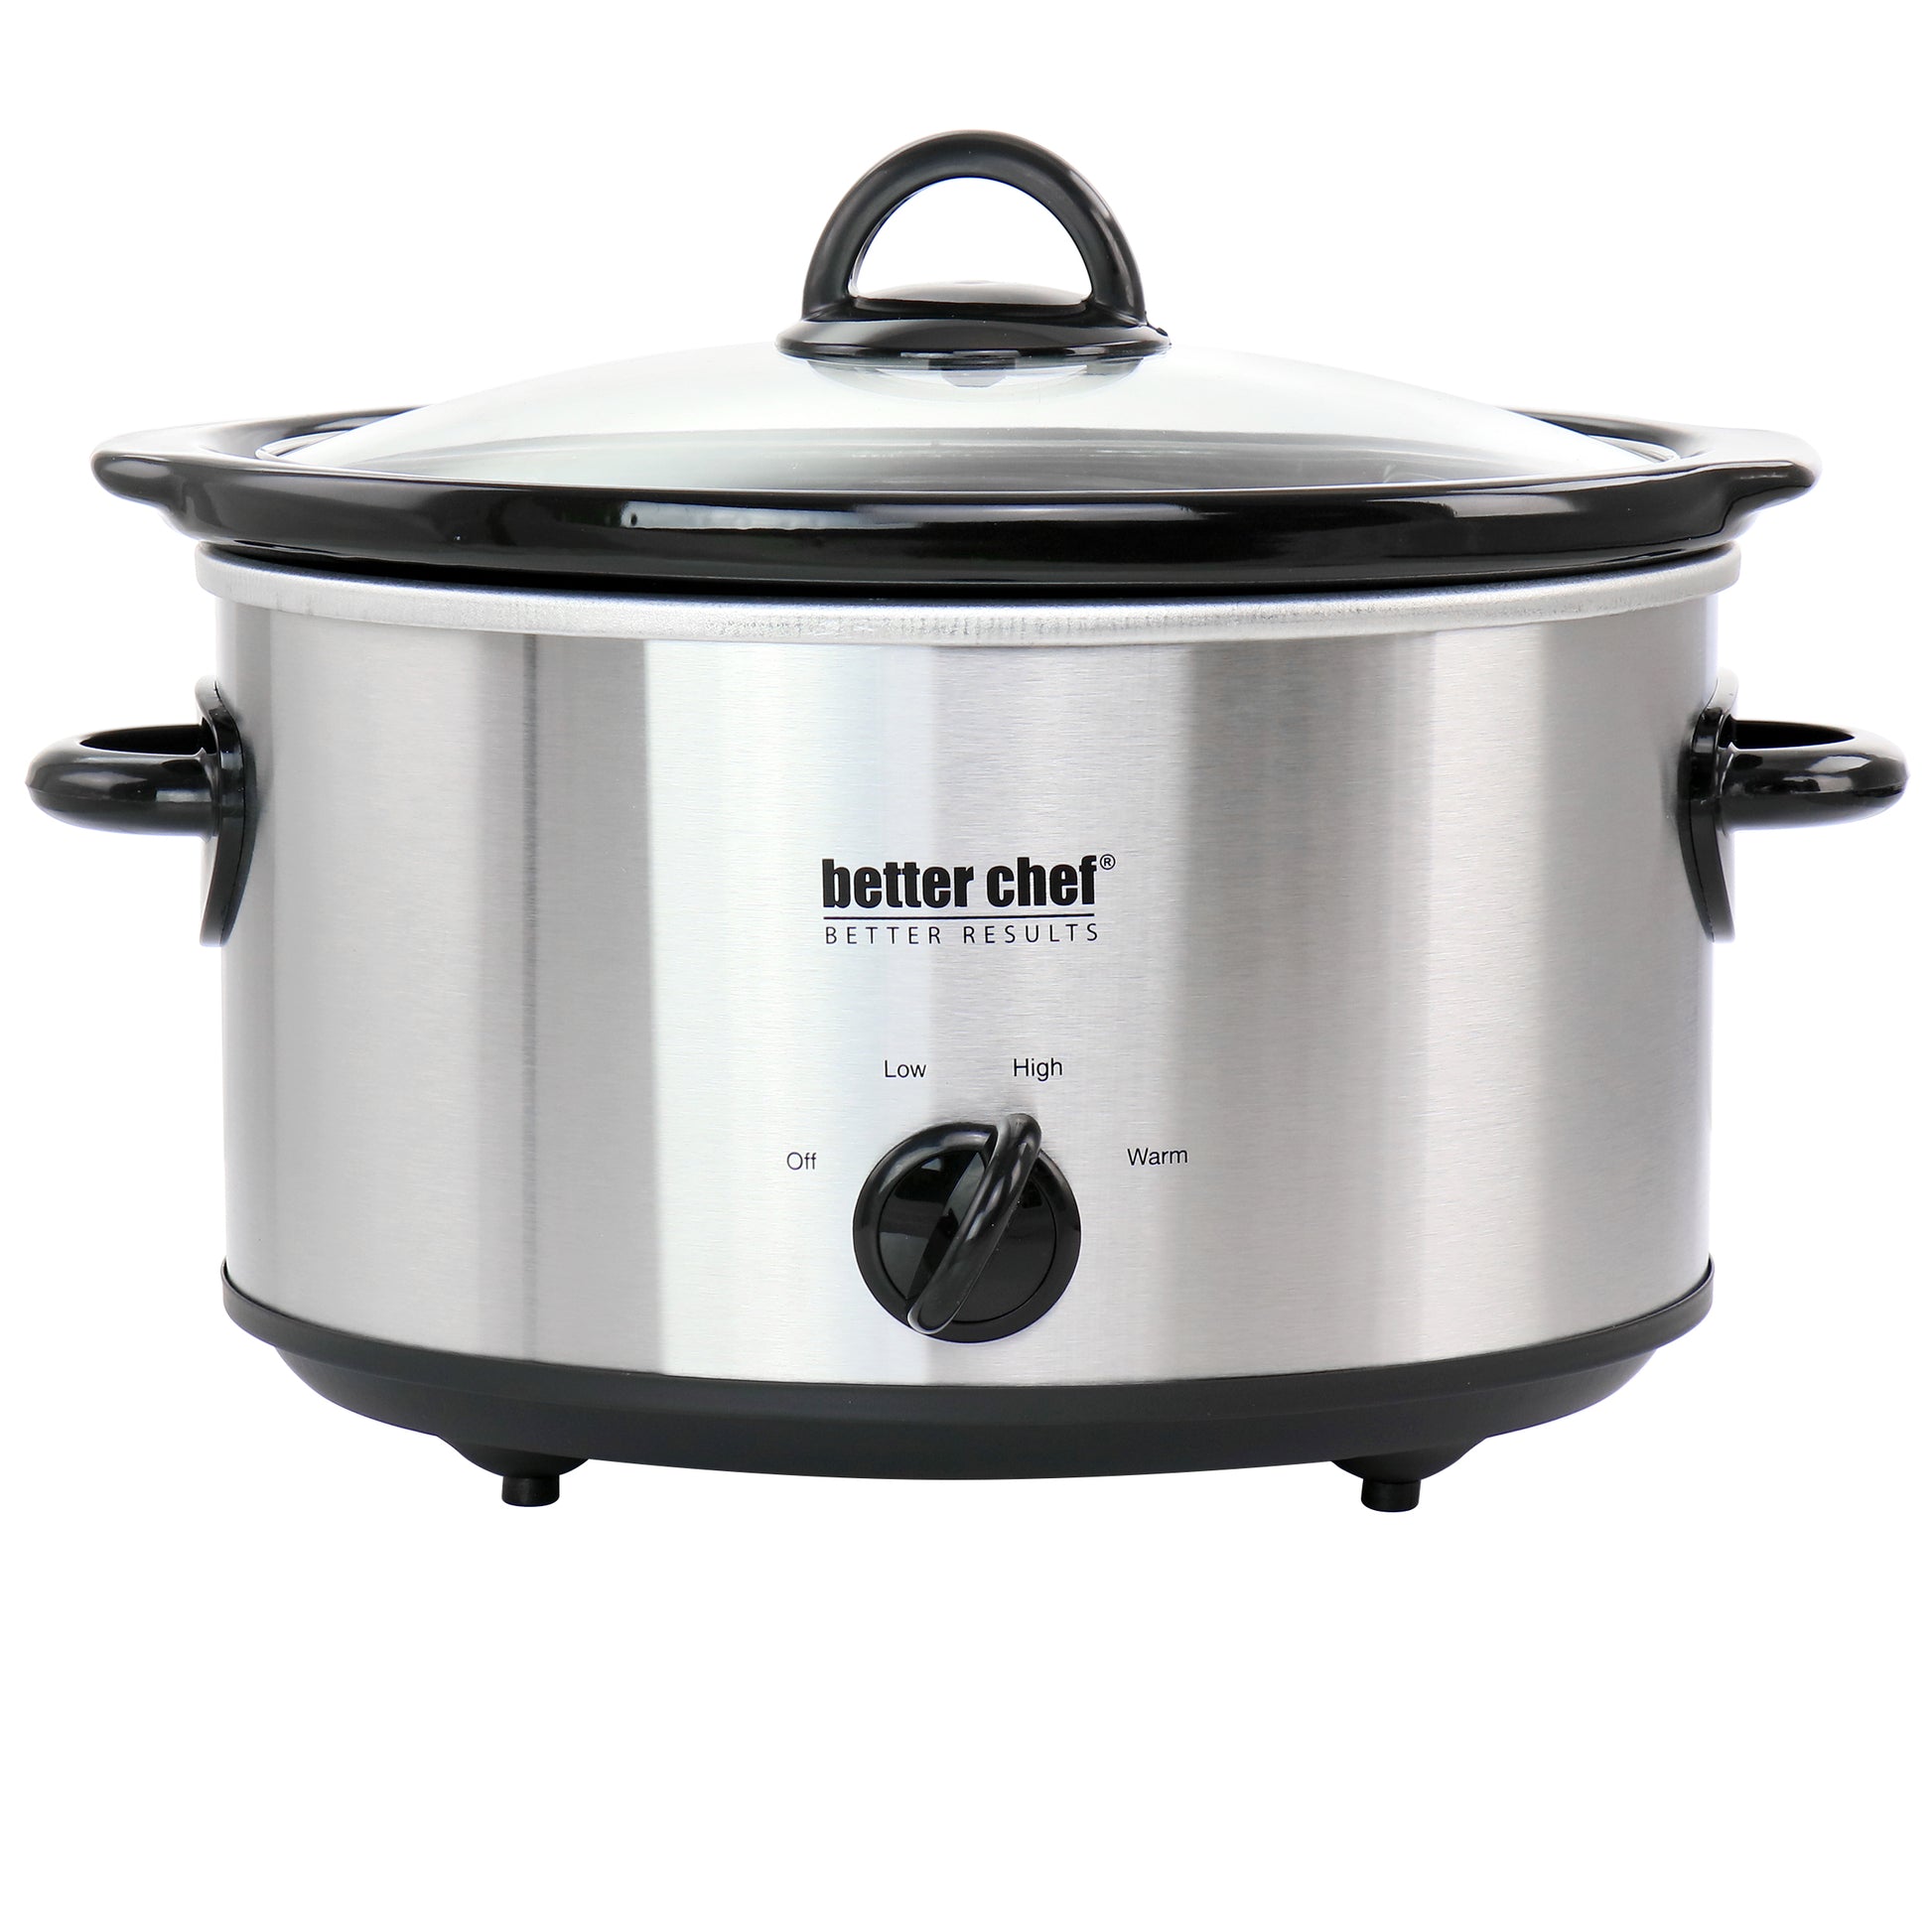 Better Chef Better Chef 4 Quart Oval Slow Cooker with Removable Stoneware Crock in Stainless Steel